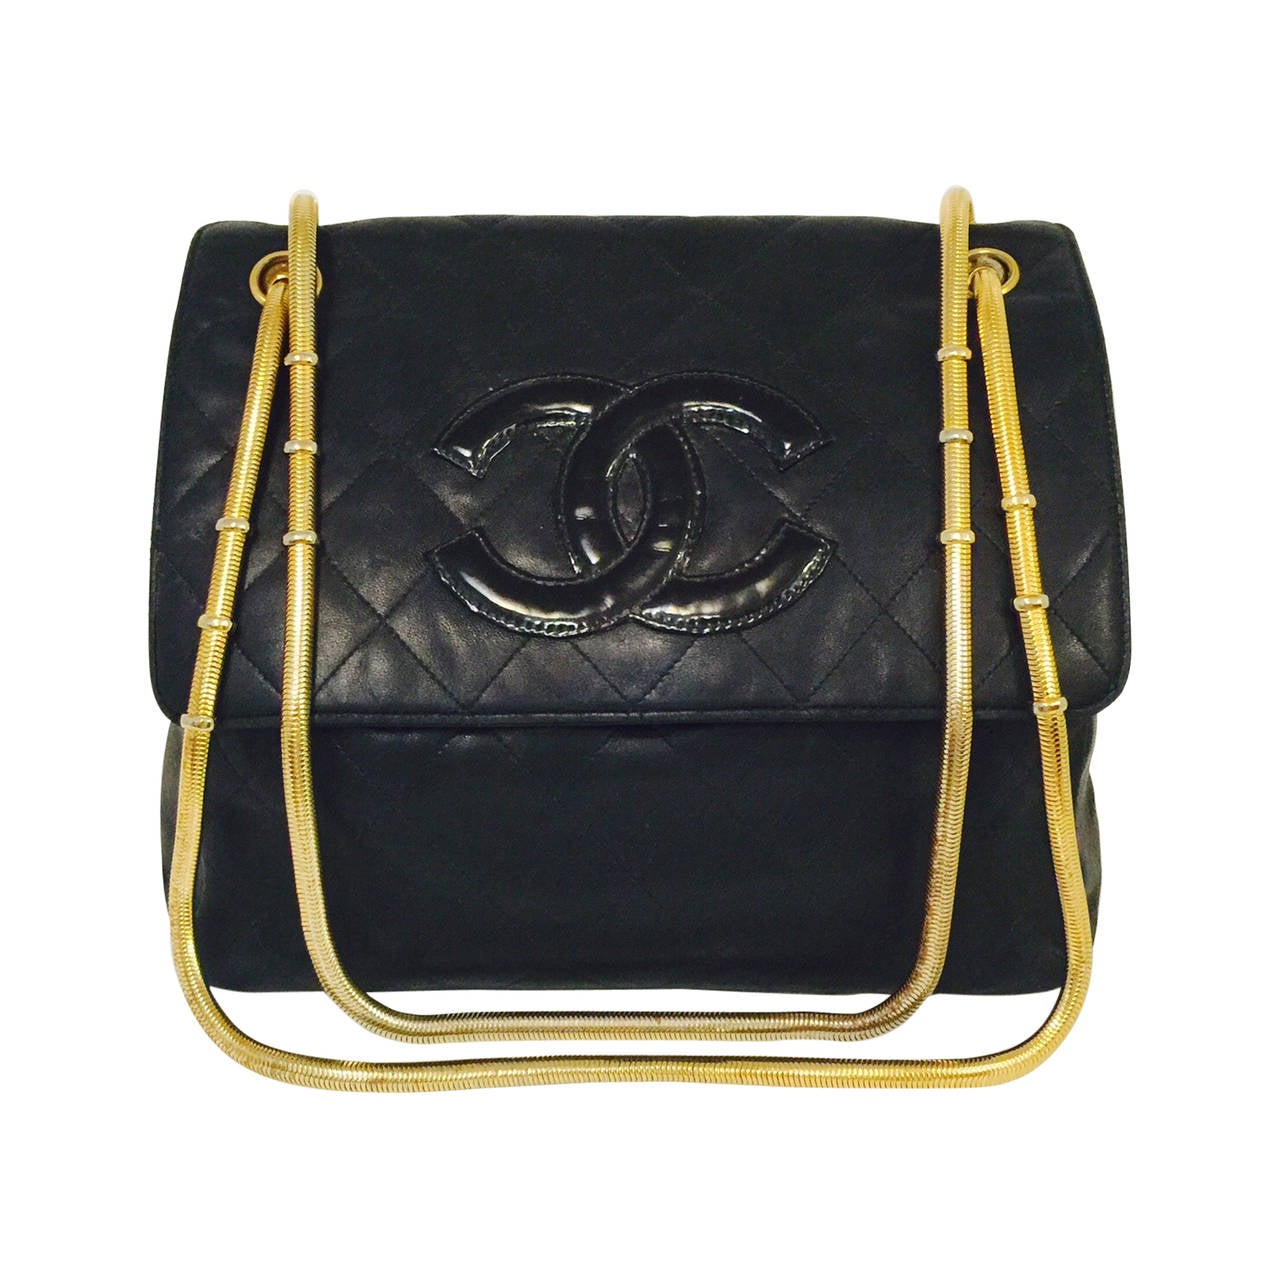 1990s Chanel Black Quilted Lambskin Shoulder Bag With Serpentine Strap For Sale